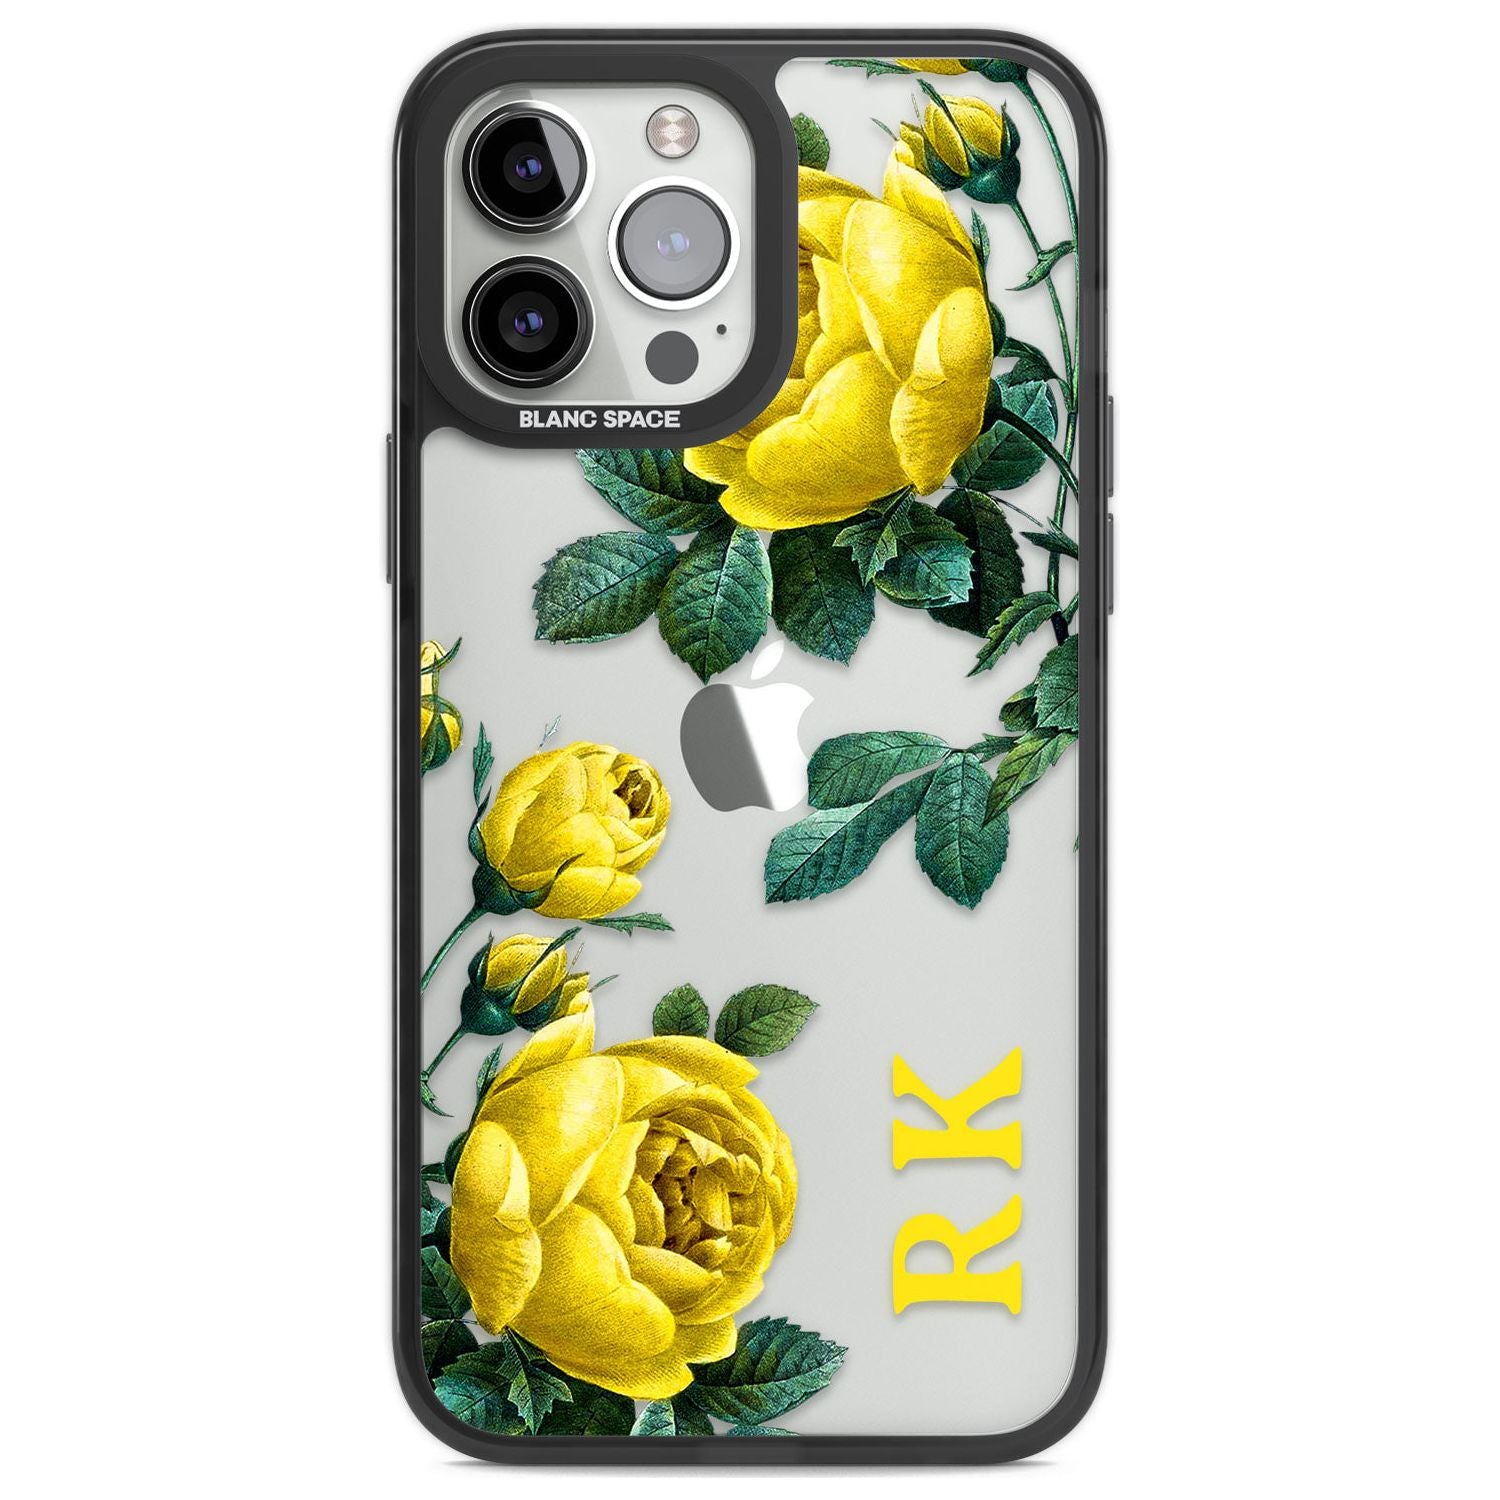 Personalised Clear Vintage Floral Yellow Roses Custom Phone Case iPhone 13 Pro Max / Black Impact Case,iPhone 14 Pro Max / Black Impact Case Blanc Space